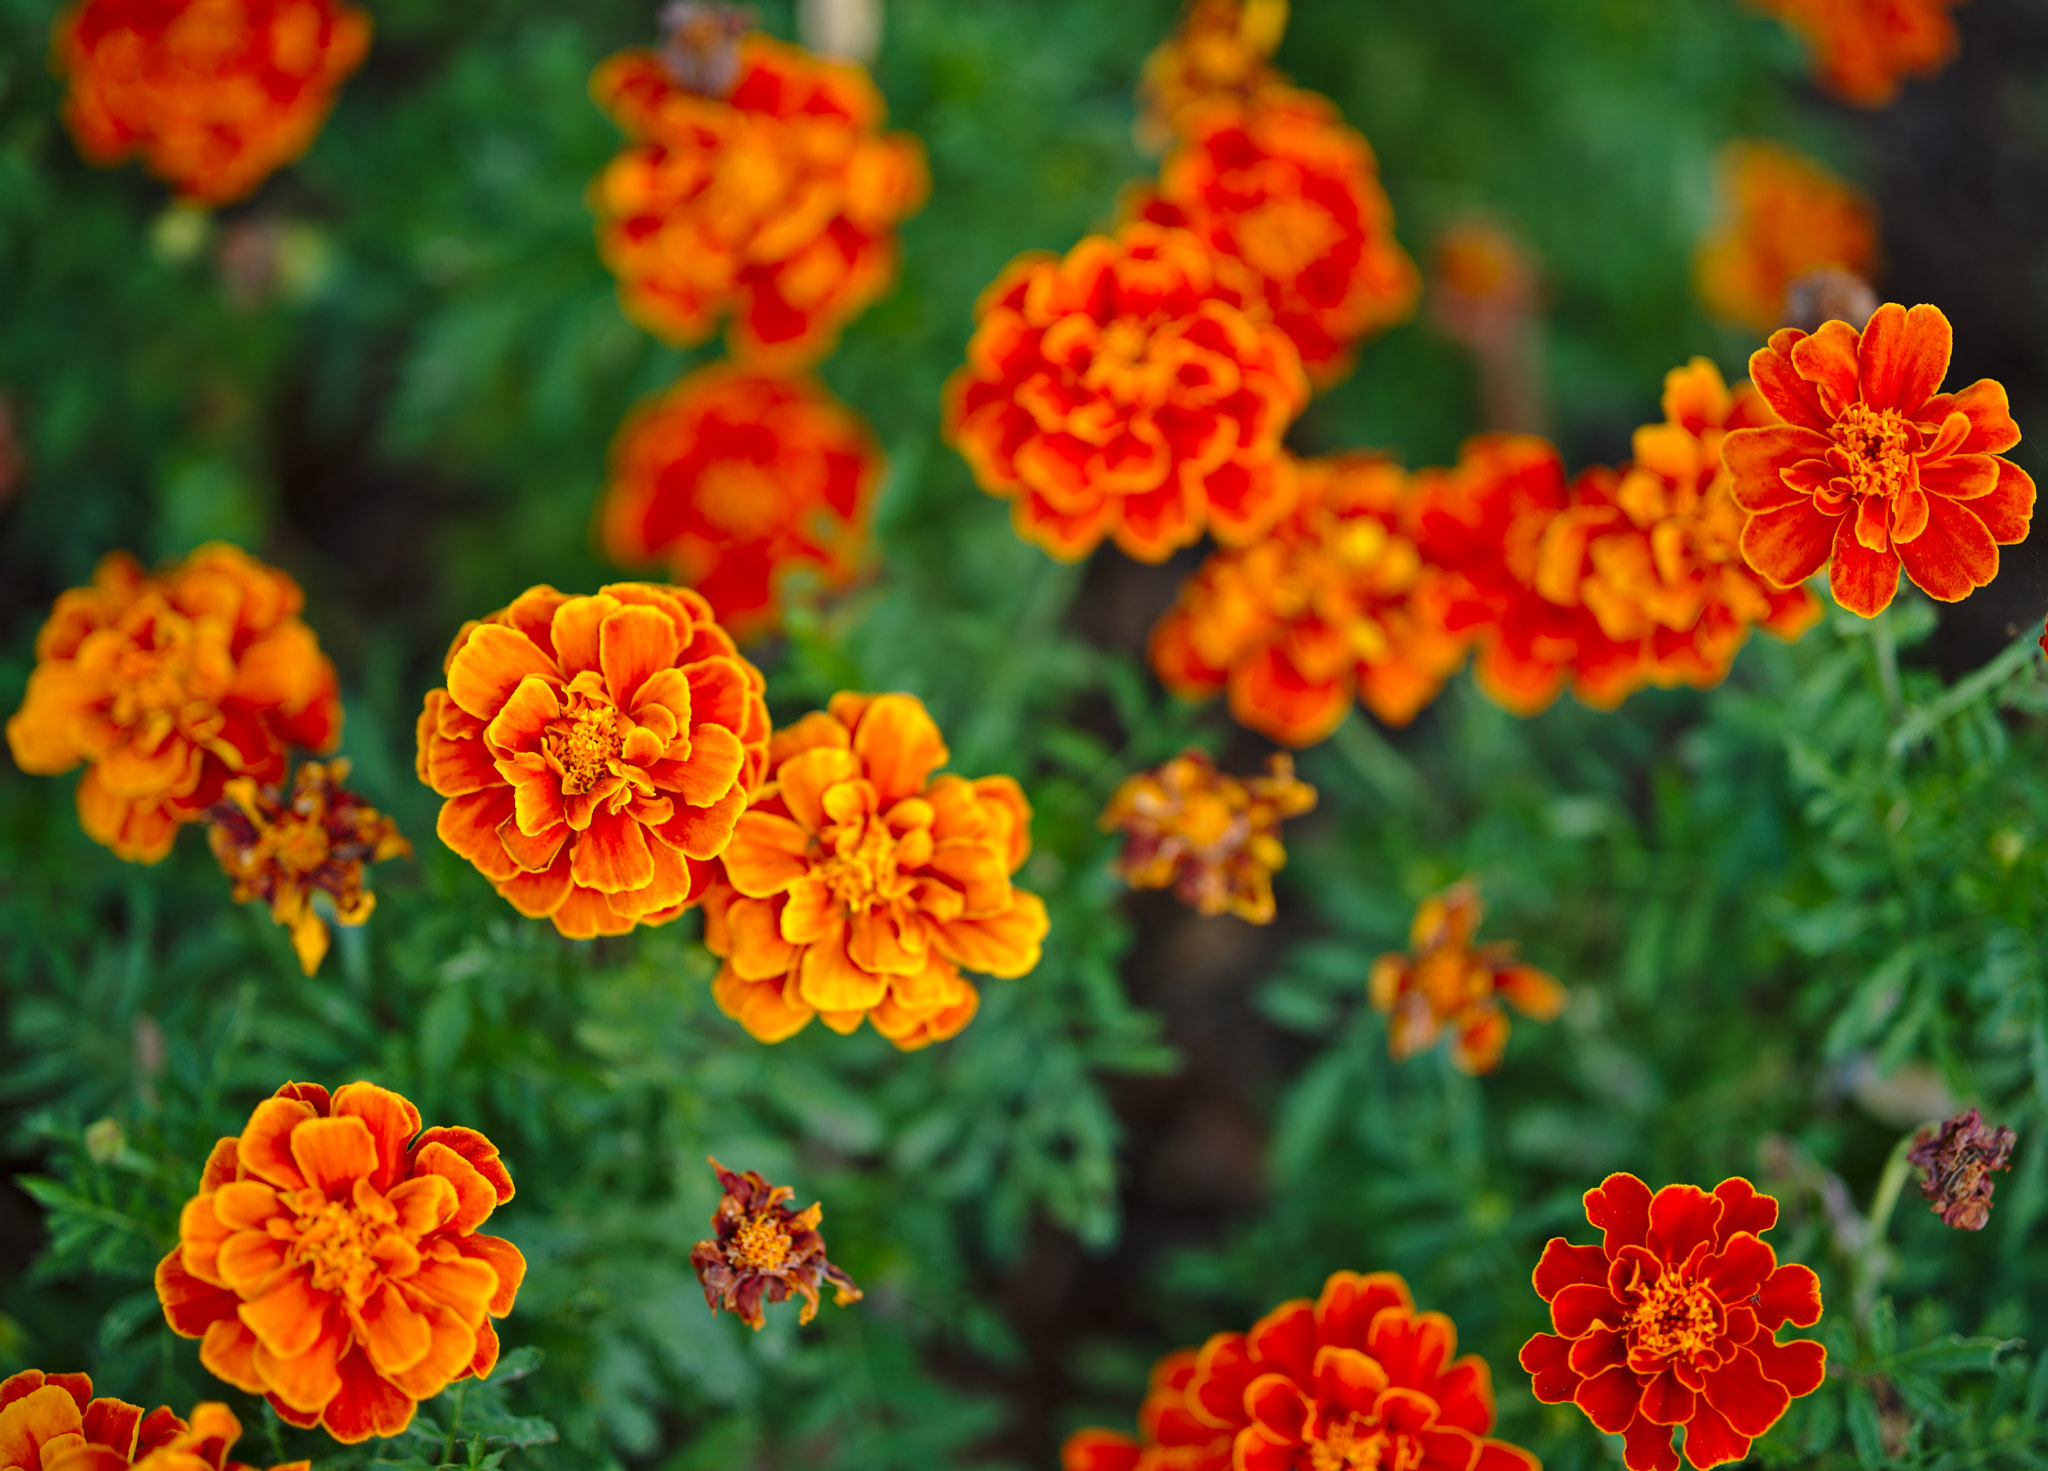 ZEISS Otus 85mm F1.4 sample photo. Marigold or tagetes photography